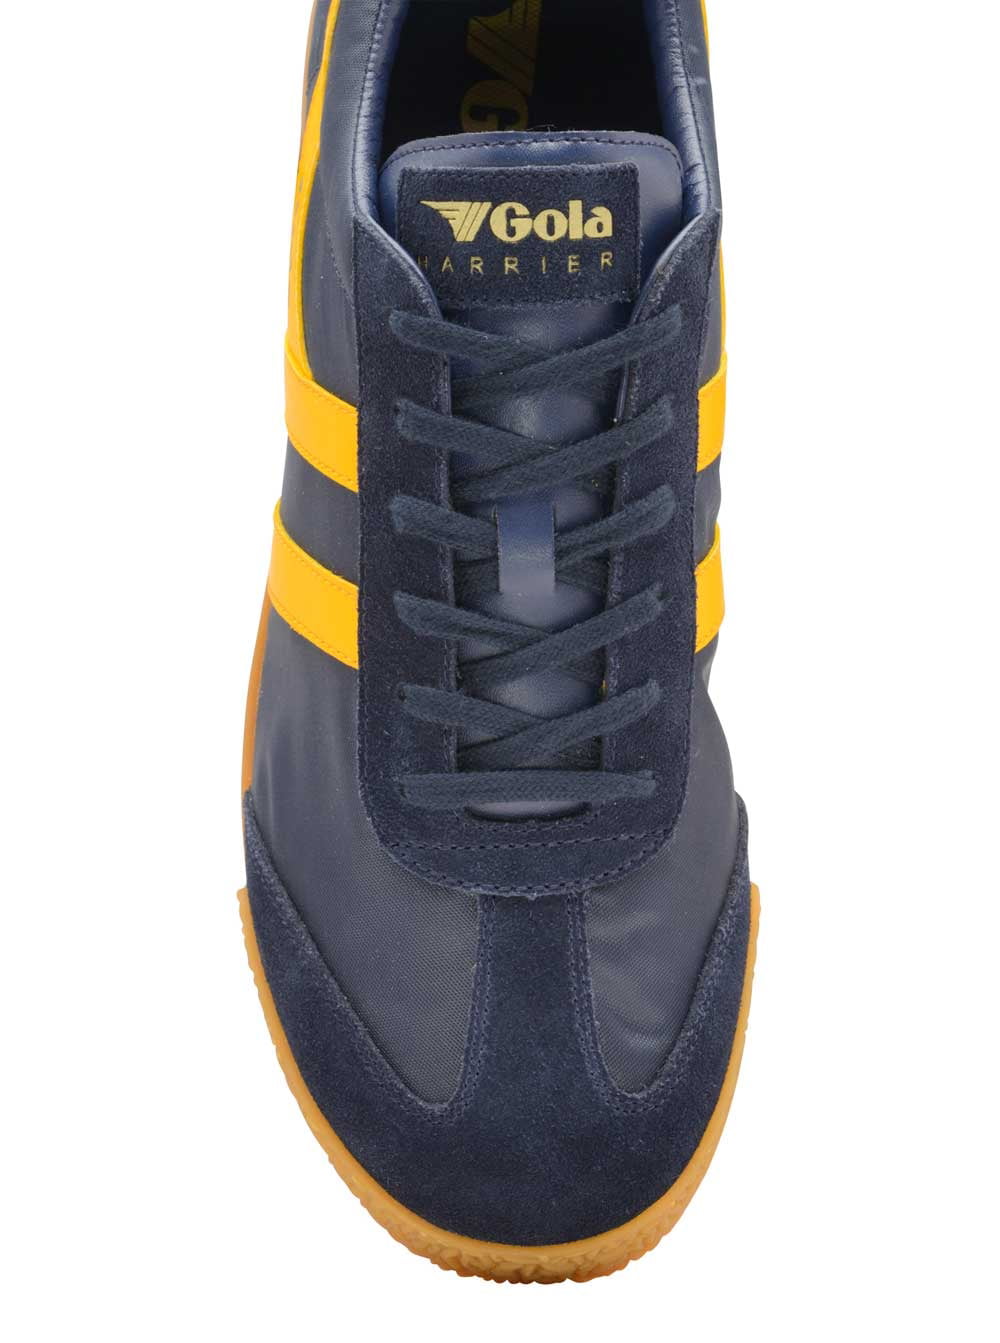 Gola Harrier Nylon CMA176 Mens Blue Lace Up Low Top Sneakers Shoes 7 